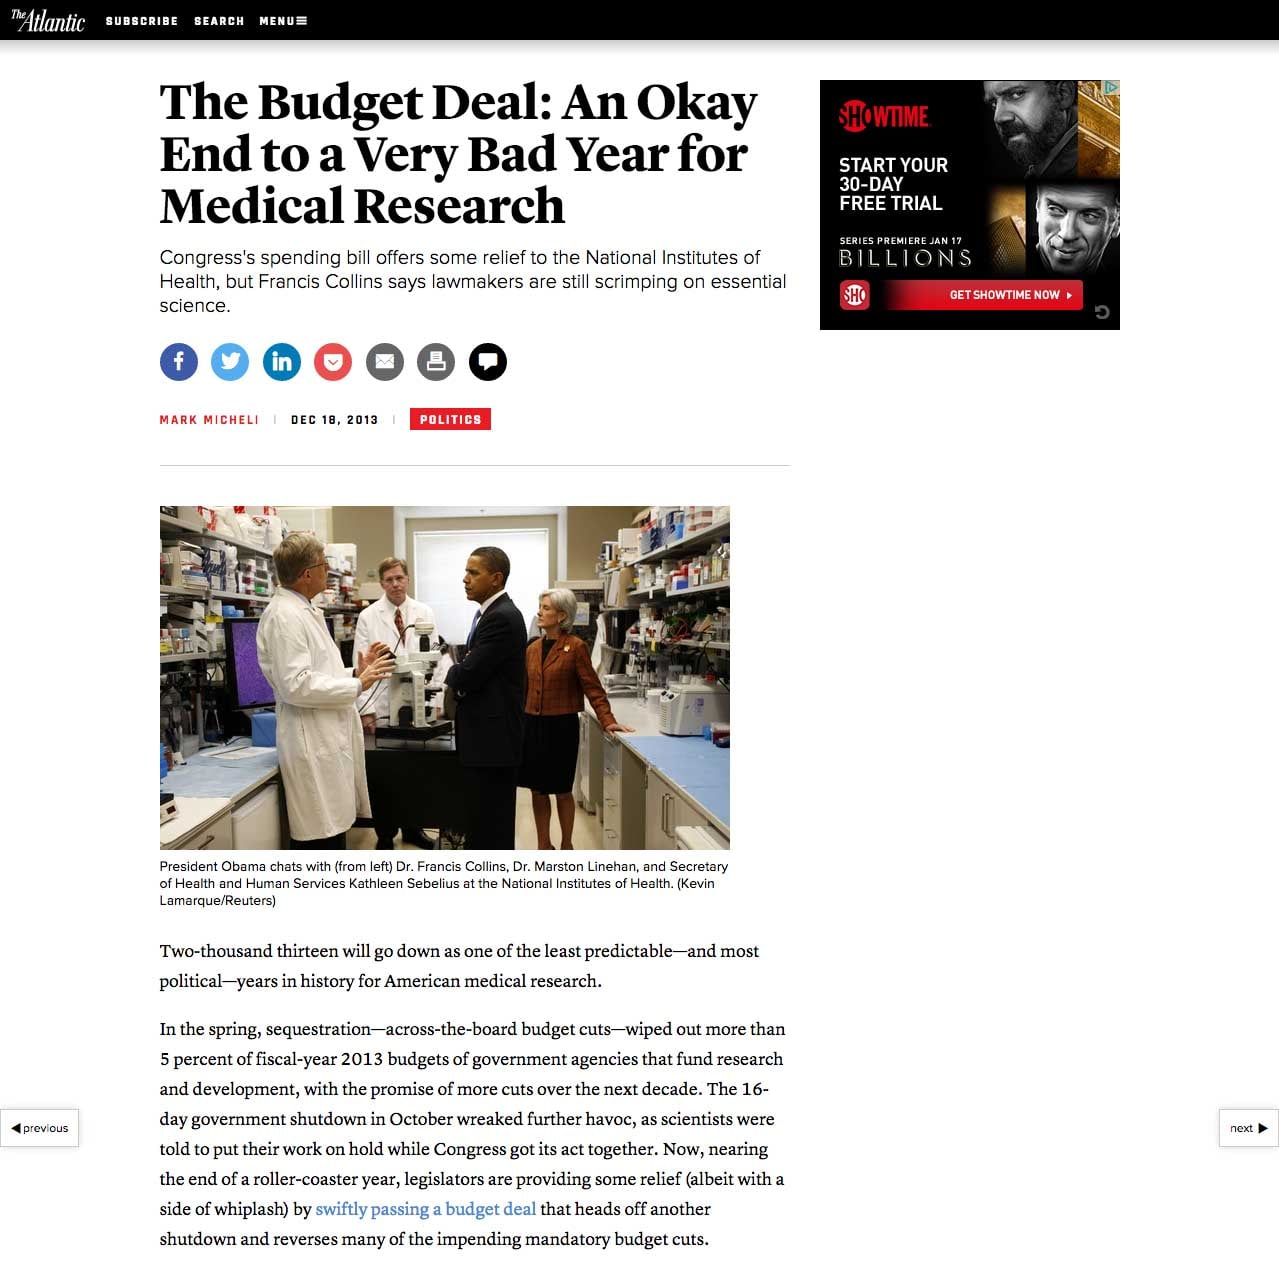 Copy of Copy of Copy of Copy of Copy of Copy of The Atlantic | The Budget Deal: An Okay End to a Very Bad Year for Medical Research